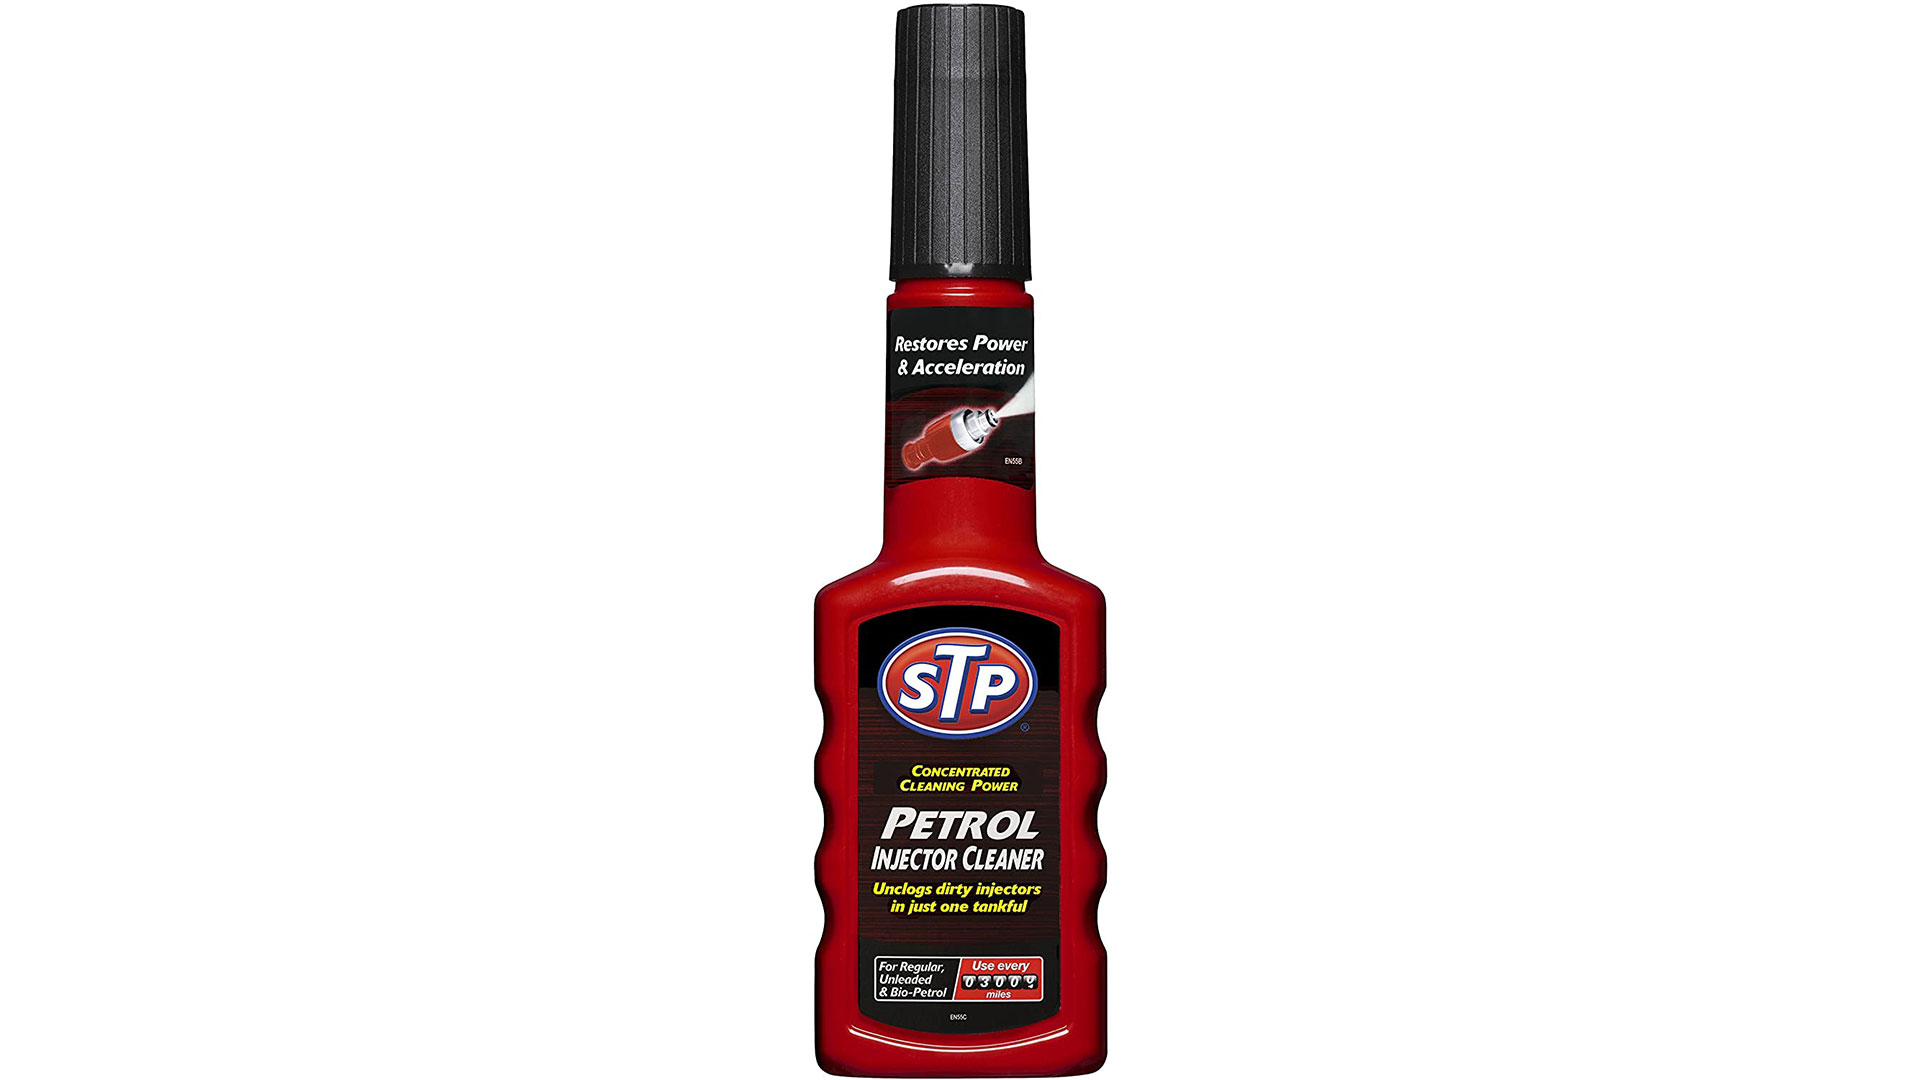 stp petrol injector cleaner